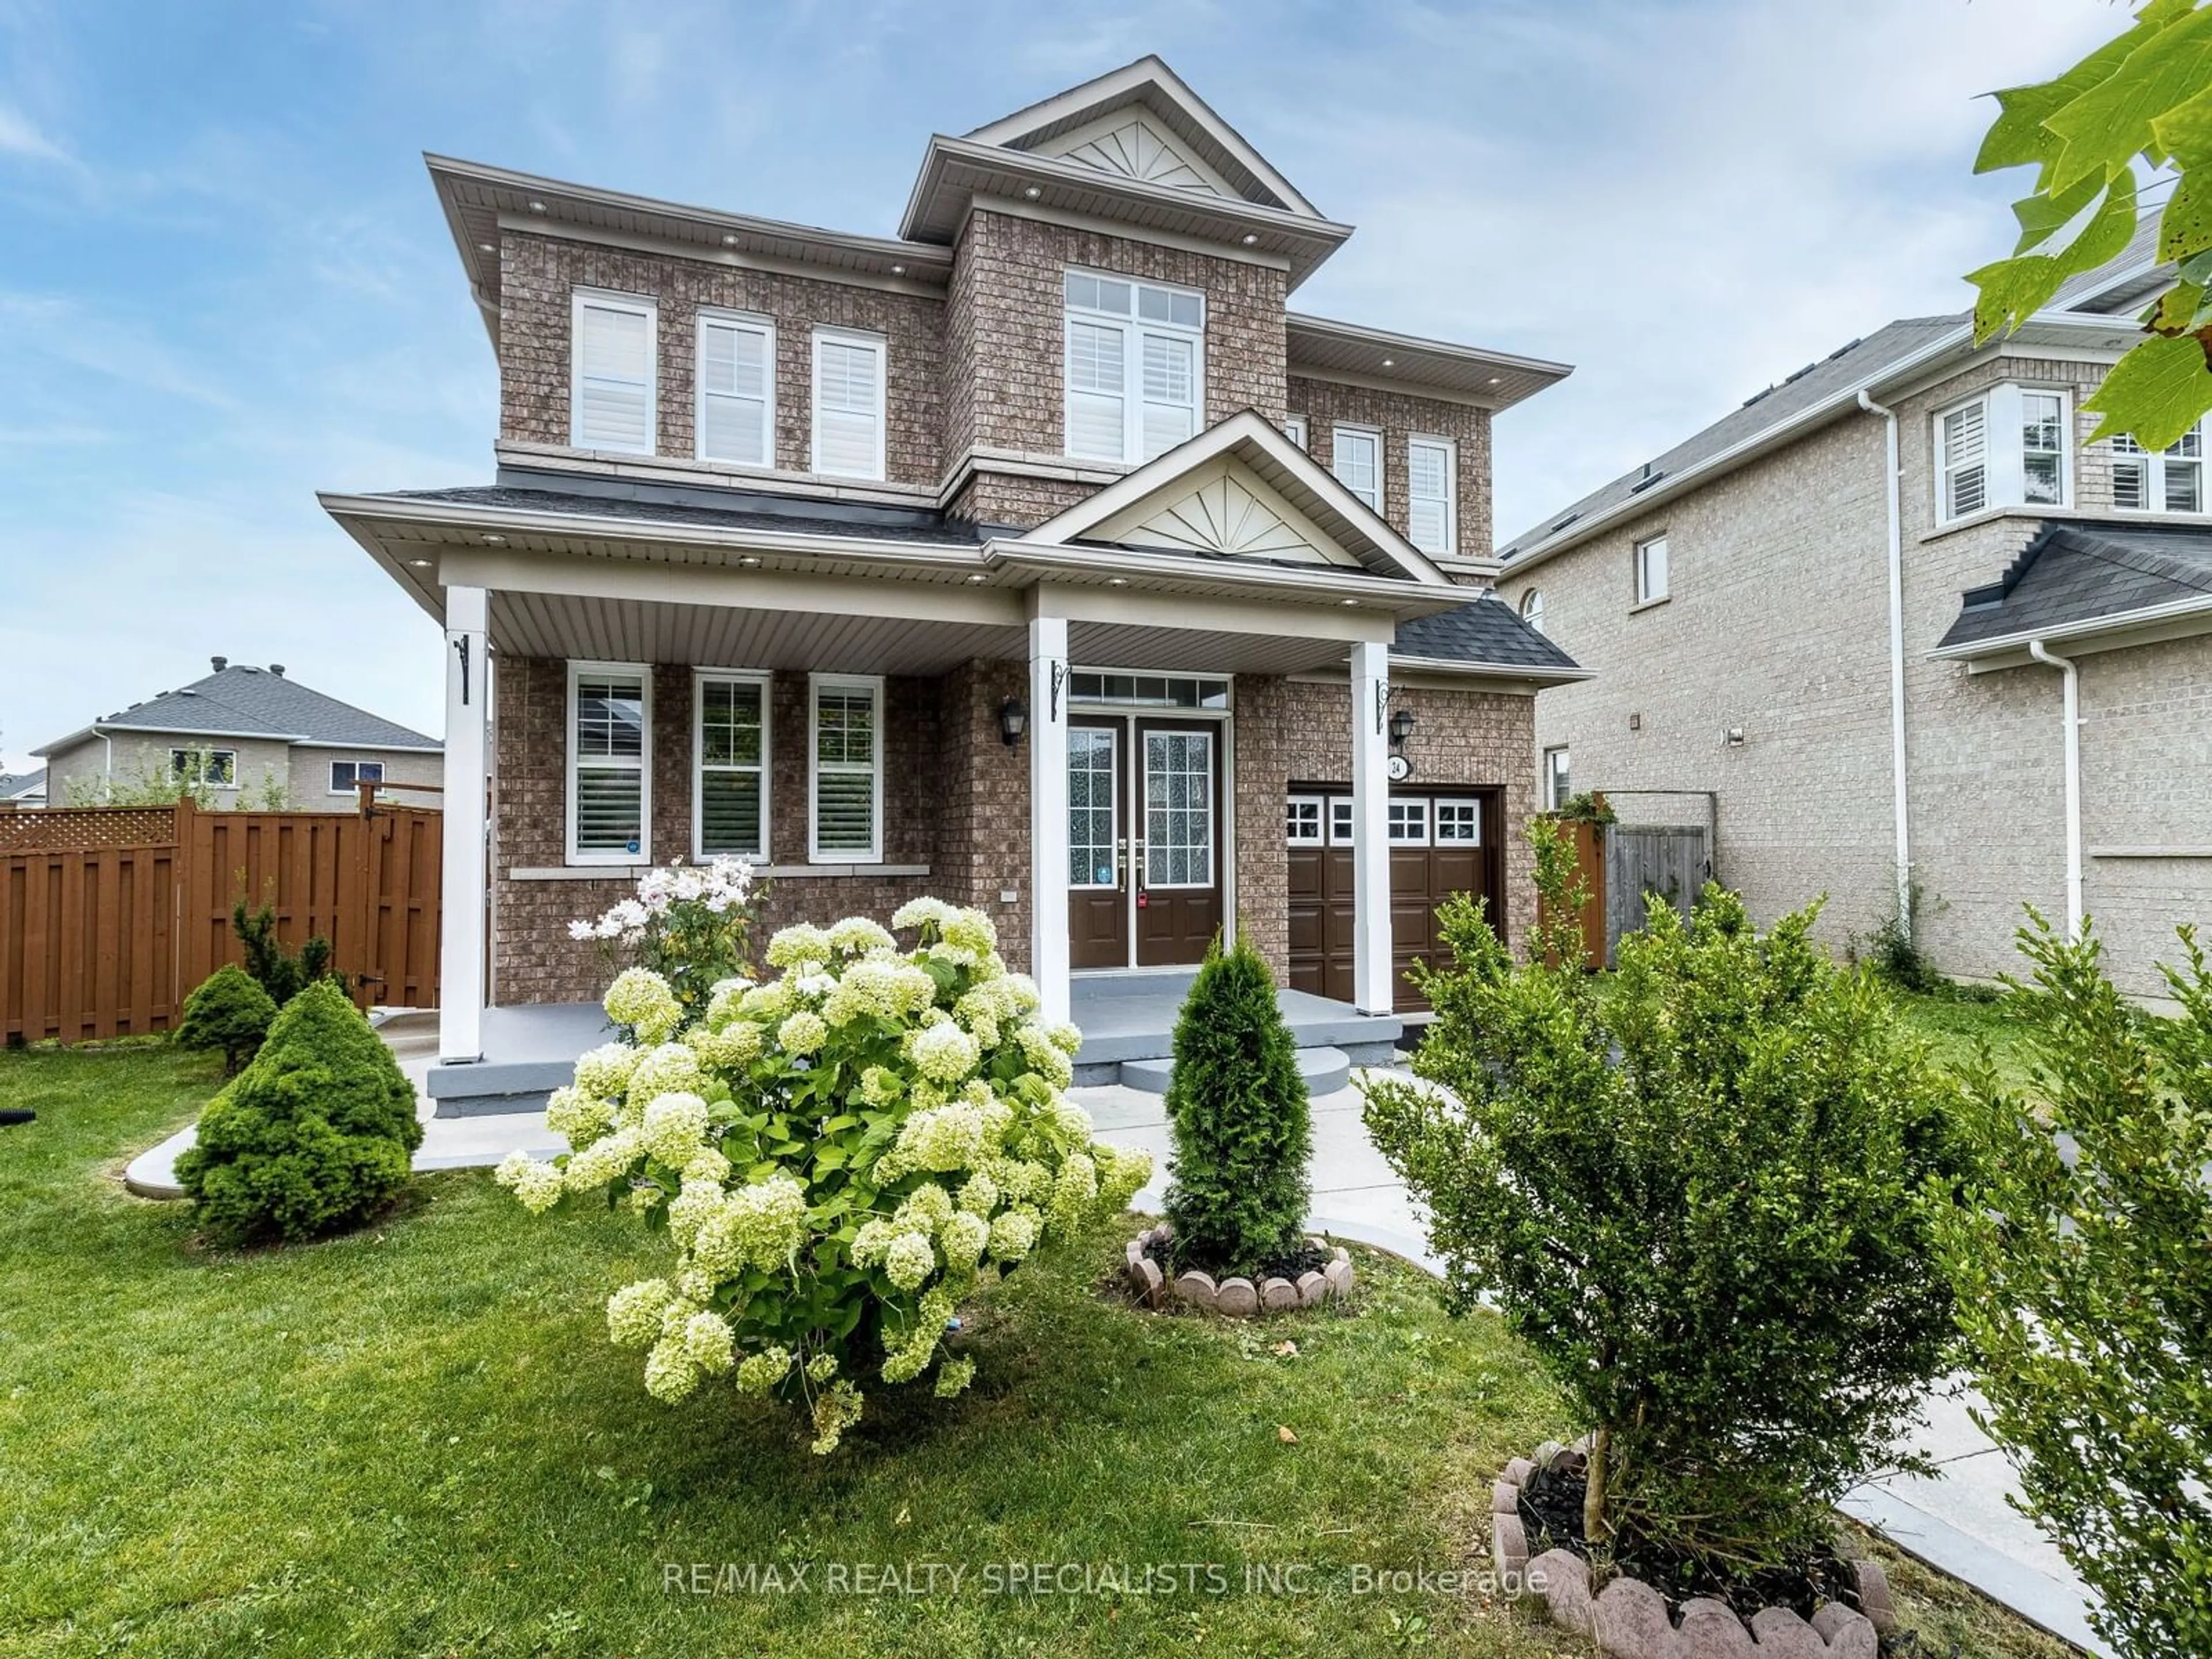 Home with brick exterior material for 24 Seahorse Ave, Brampton Ontario L6V 4N7